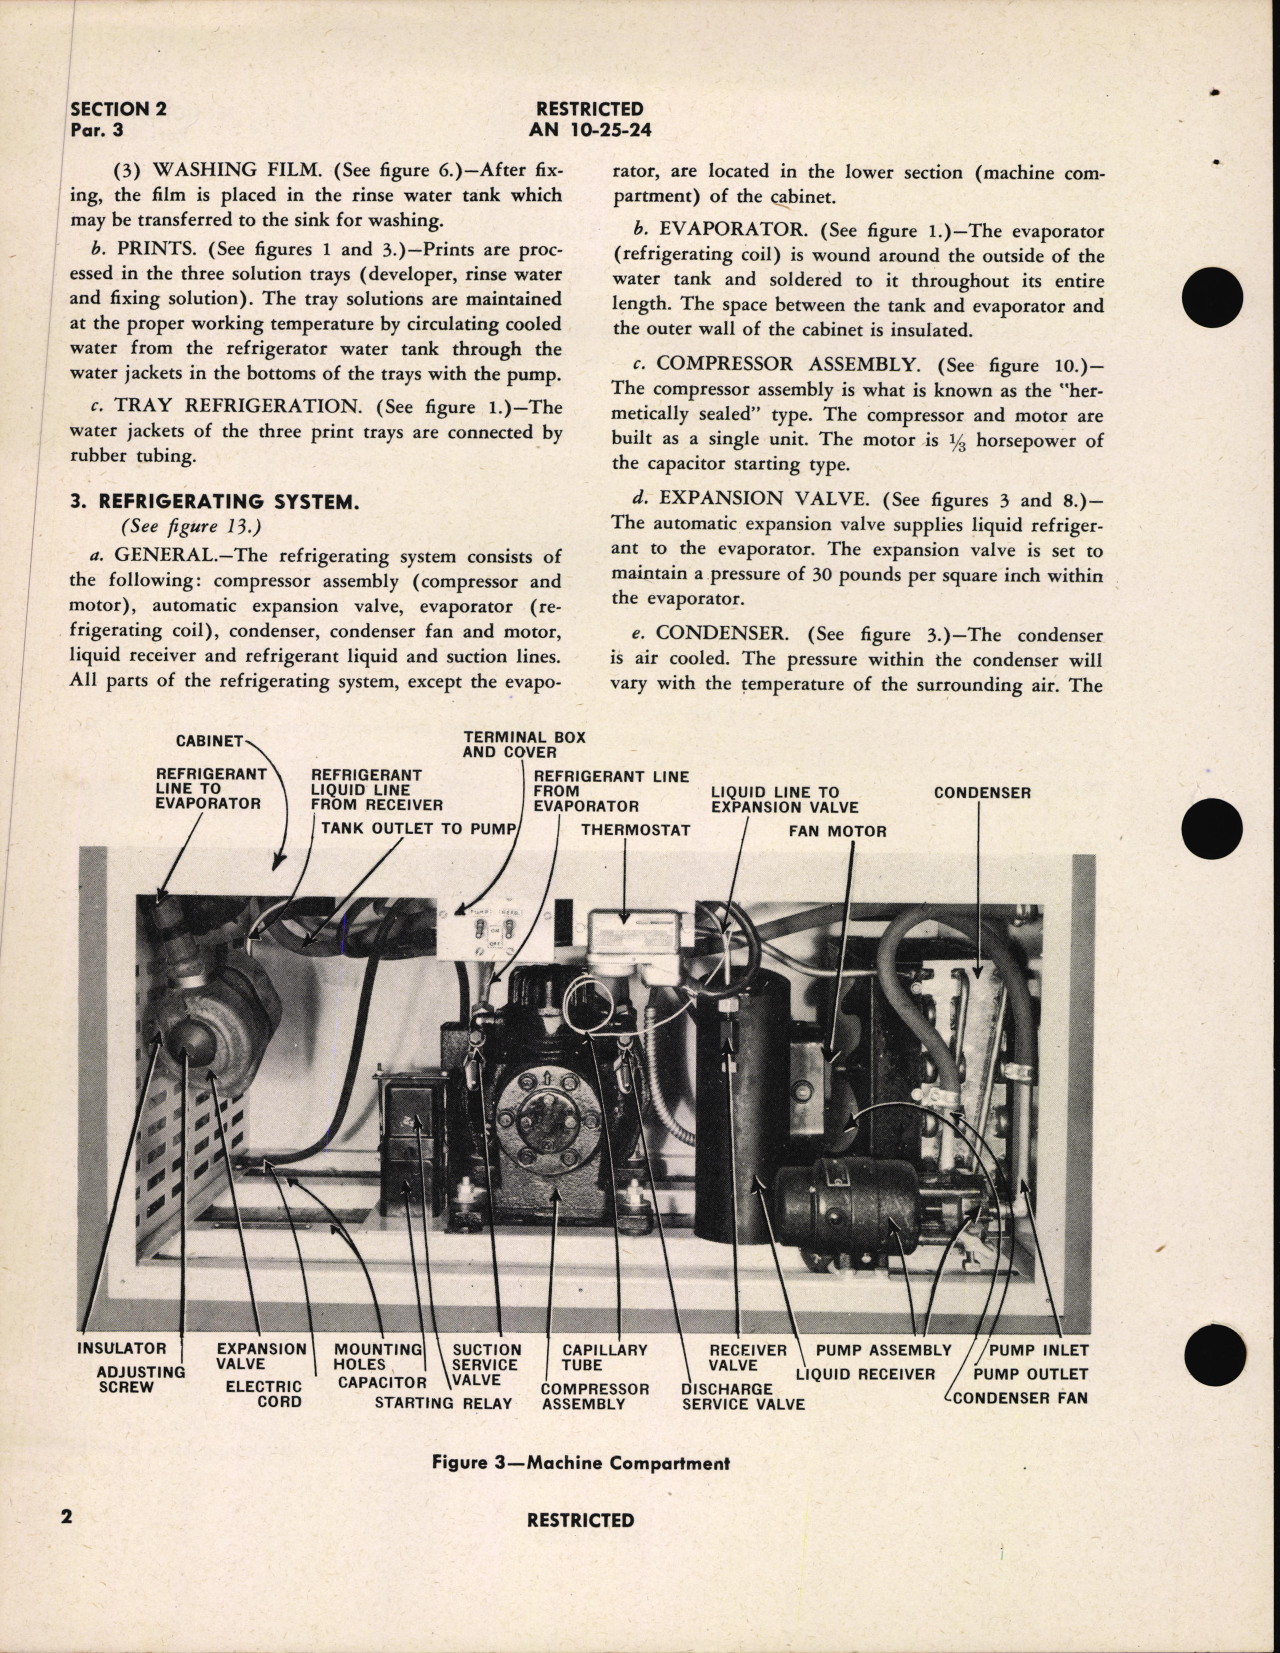 Sample page 8 from AirCorps Library document: Handbook of Instructions with Parts Catalog for Photographic Film-Processing Refrigerator